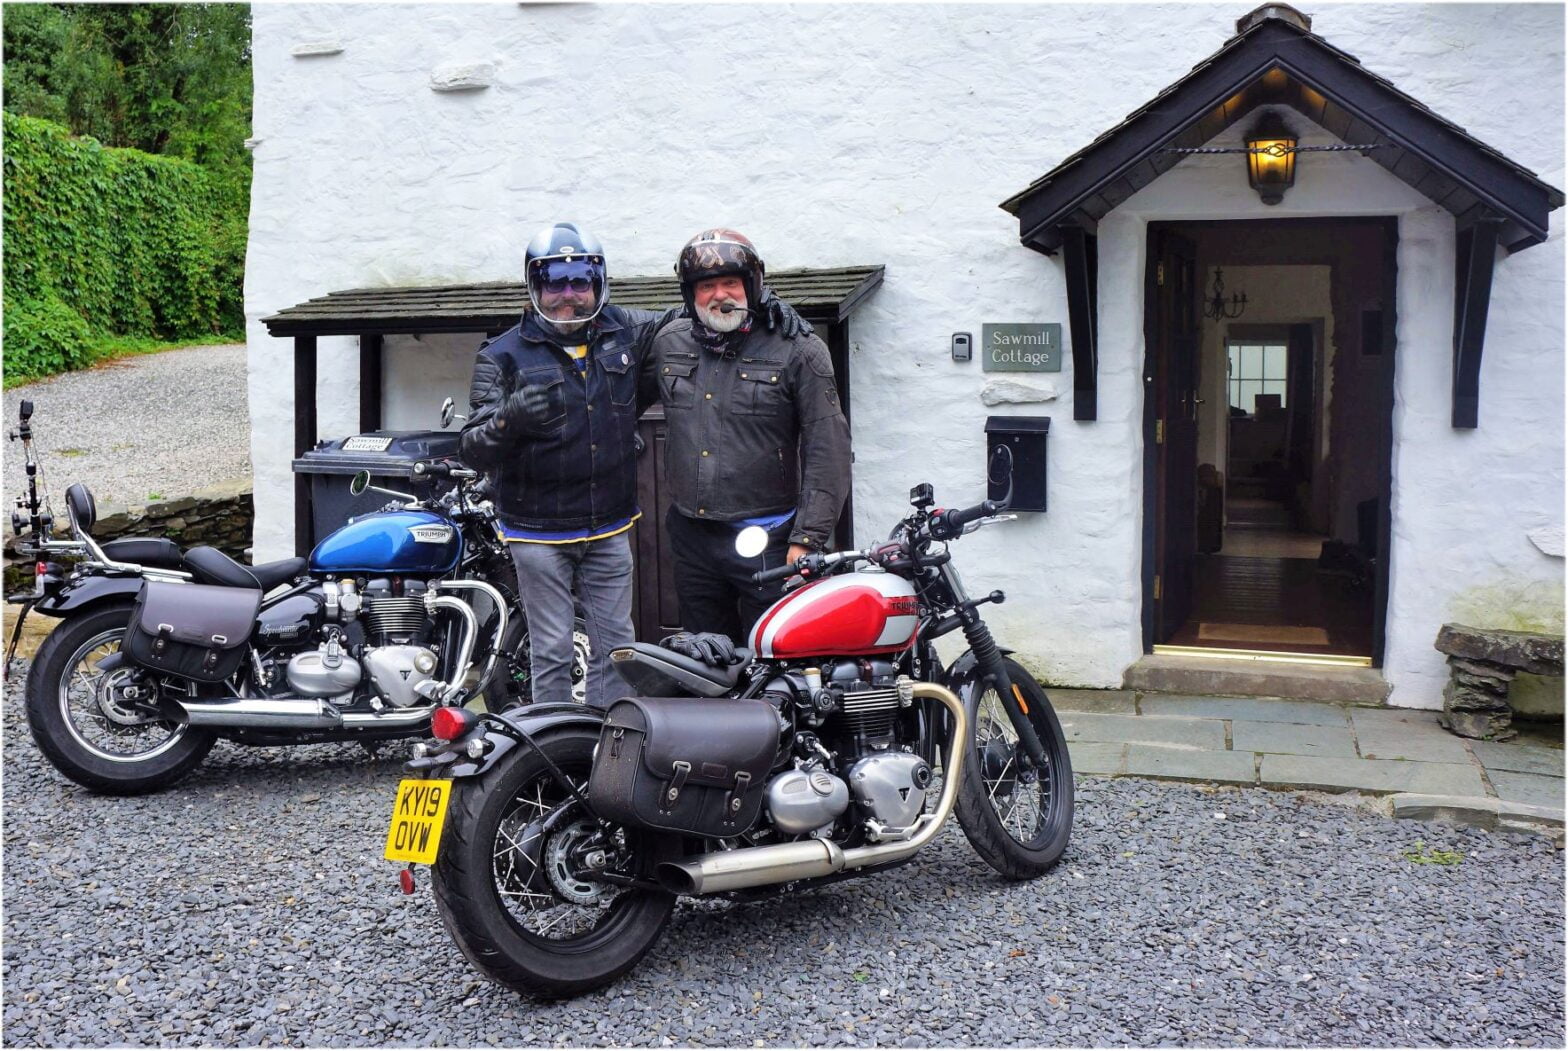 The Hairy Bikers at Sawmill Cottage